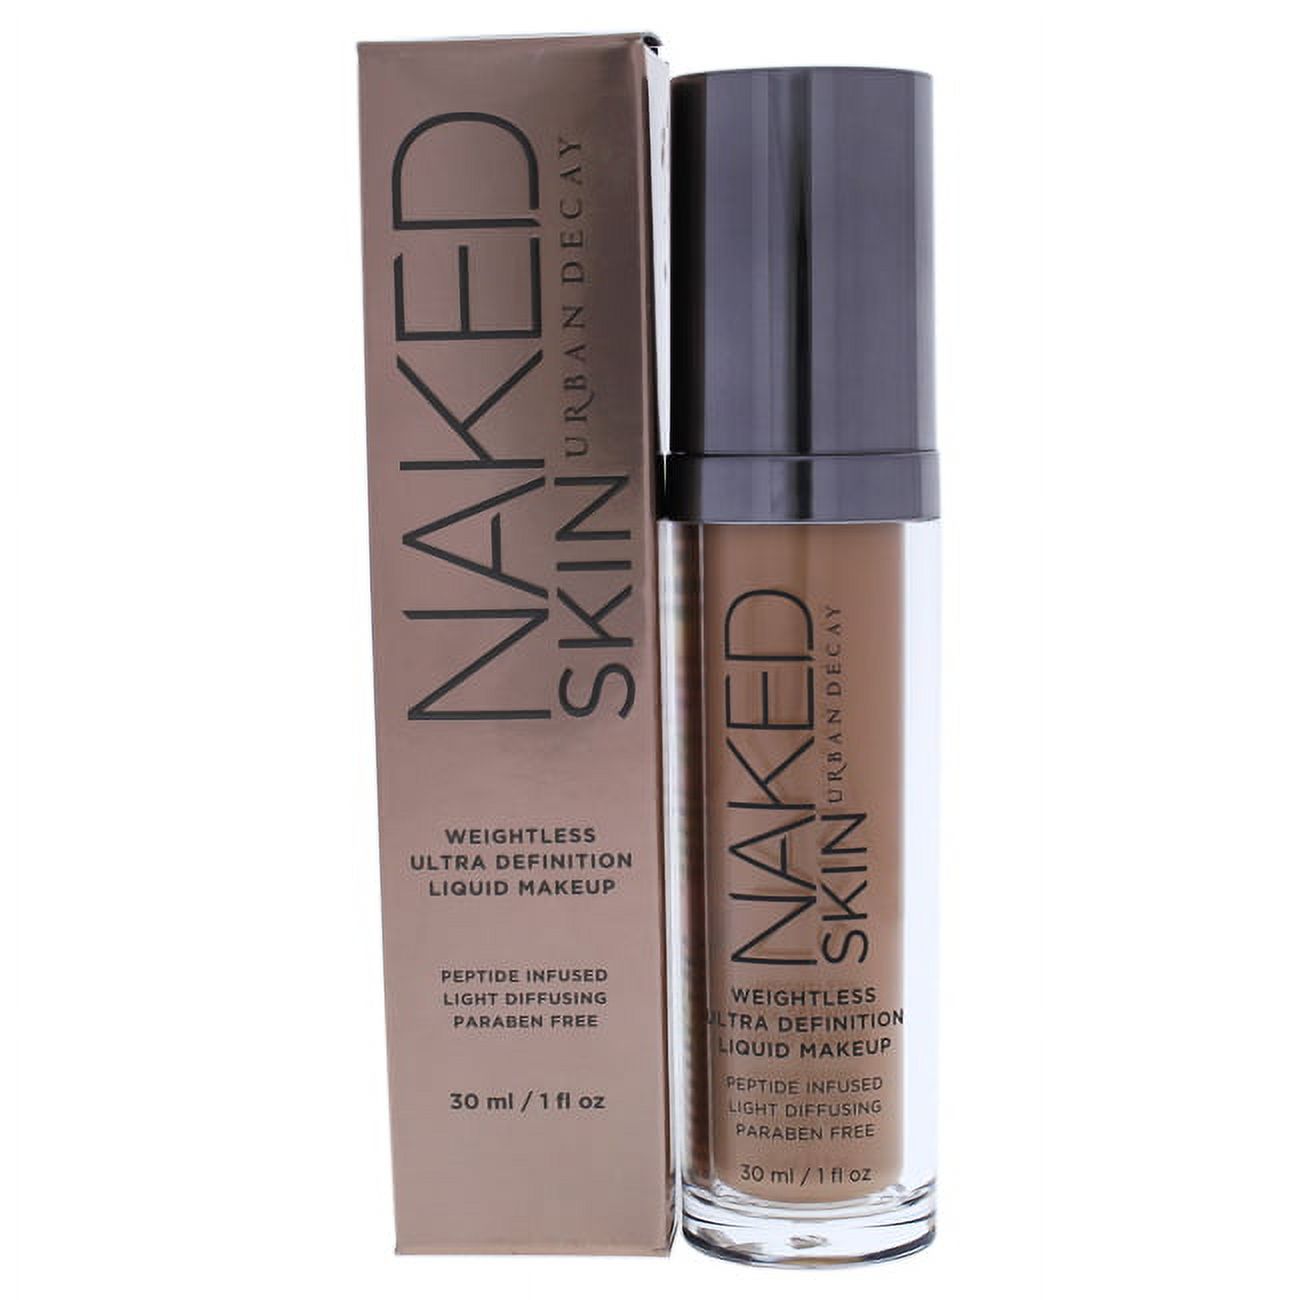 Naked Skin Weightless Ultra Definition Liquid Makeup - 3.5 by Urban Decay for Women - 1 oz Foundation - image 1 of 2